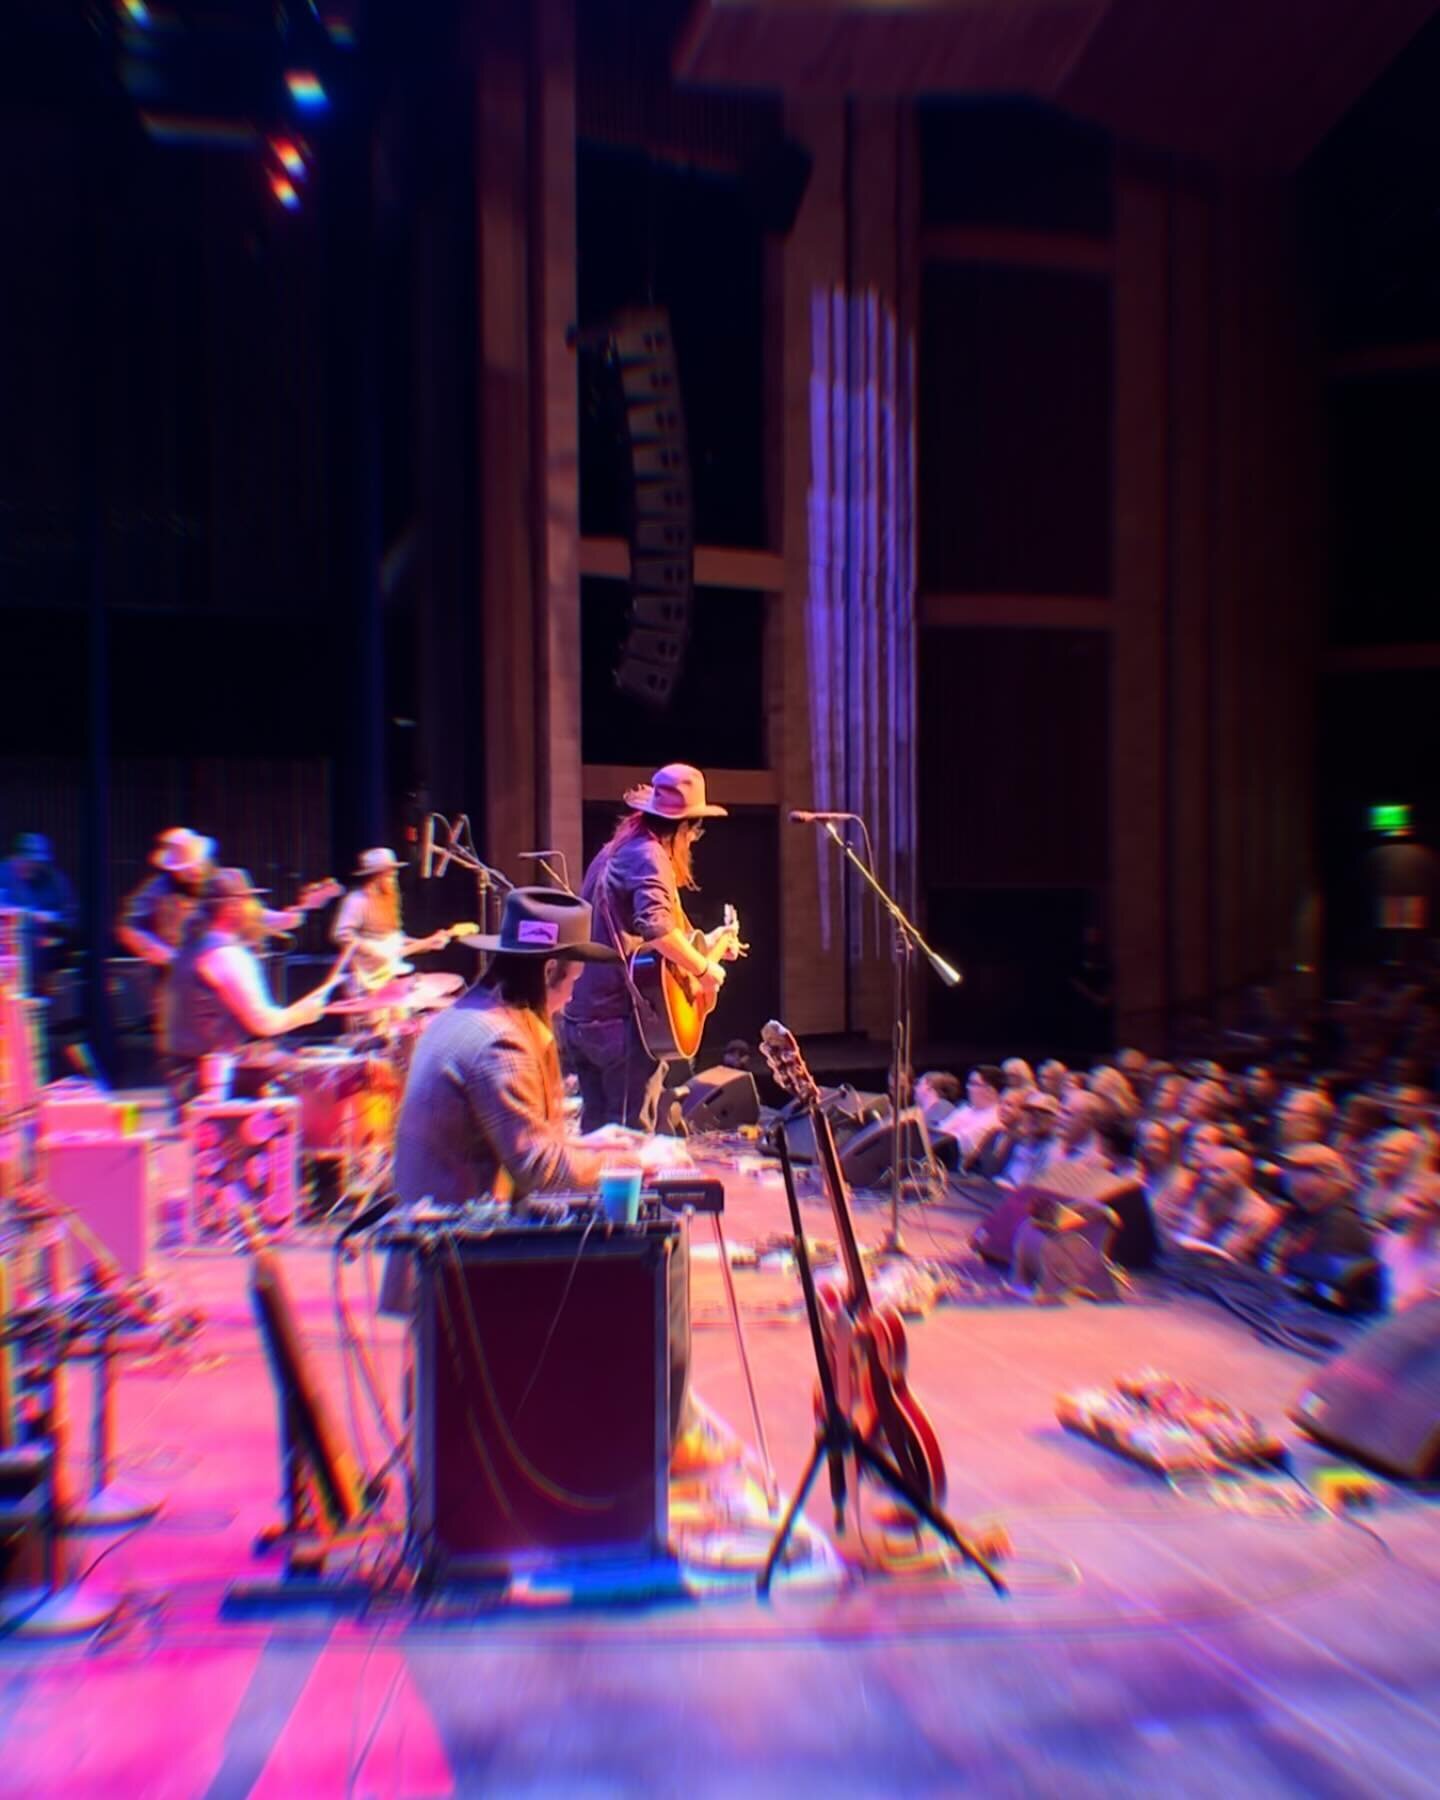 Well last night definitely didn&rsquo;t suck. Reckless Kelly BROUGHT IT last night.. It&rsquo;s always a pleasure sharing the stage with our brothers in @recklesskelly96 | It was a bonus to do it at such a beautiful venue&hellip; @morrisoncenter , Th